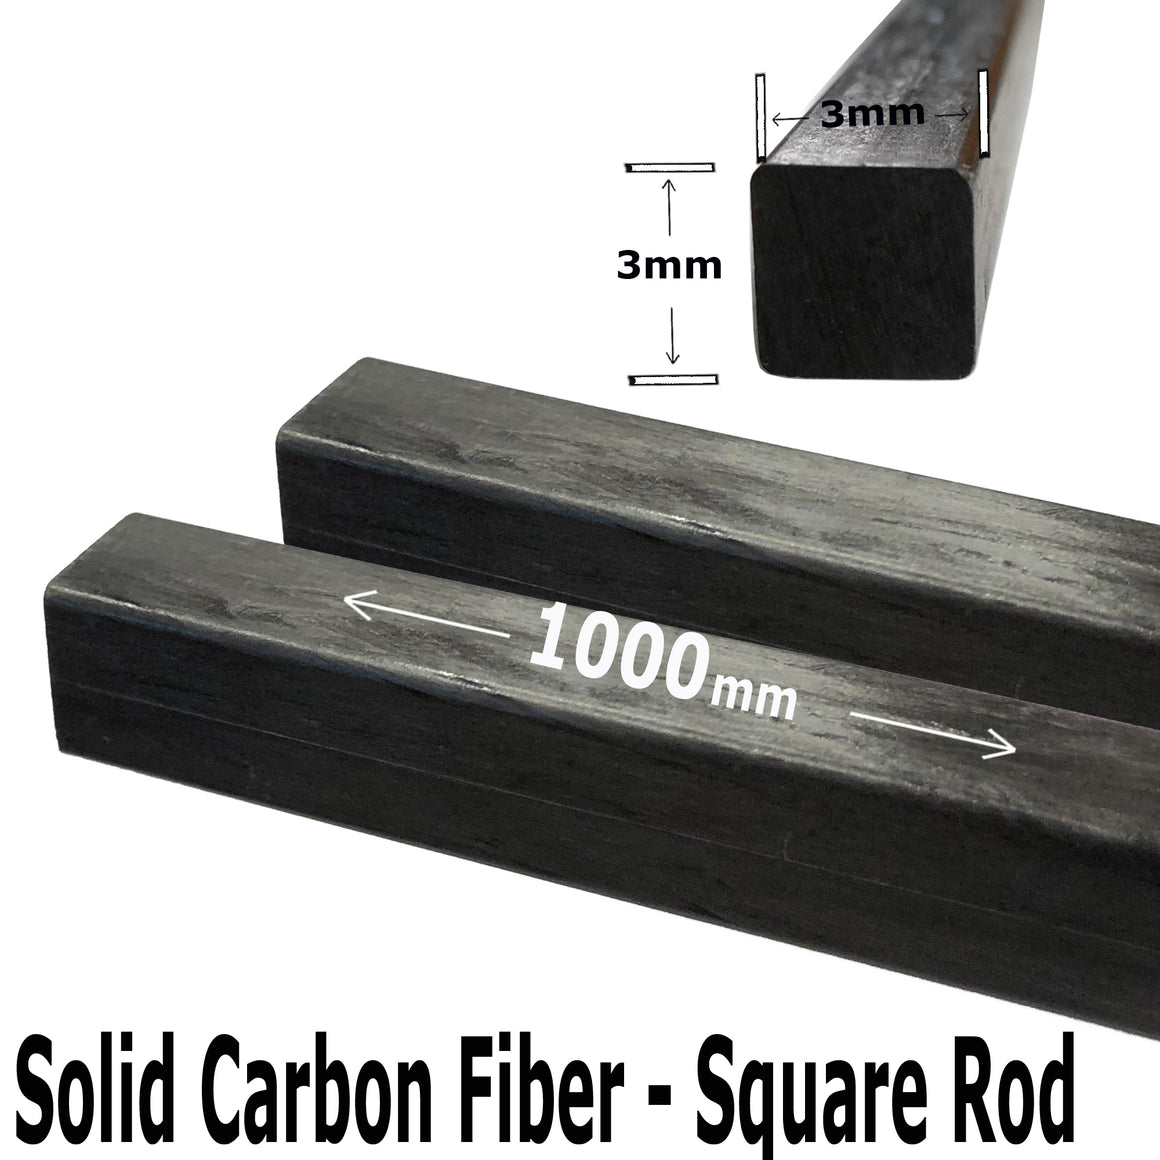 Pultruded Carbon Fiber Square Rods - 3mm x 3mm x 1000mm - High Strength Solid Rods